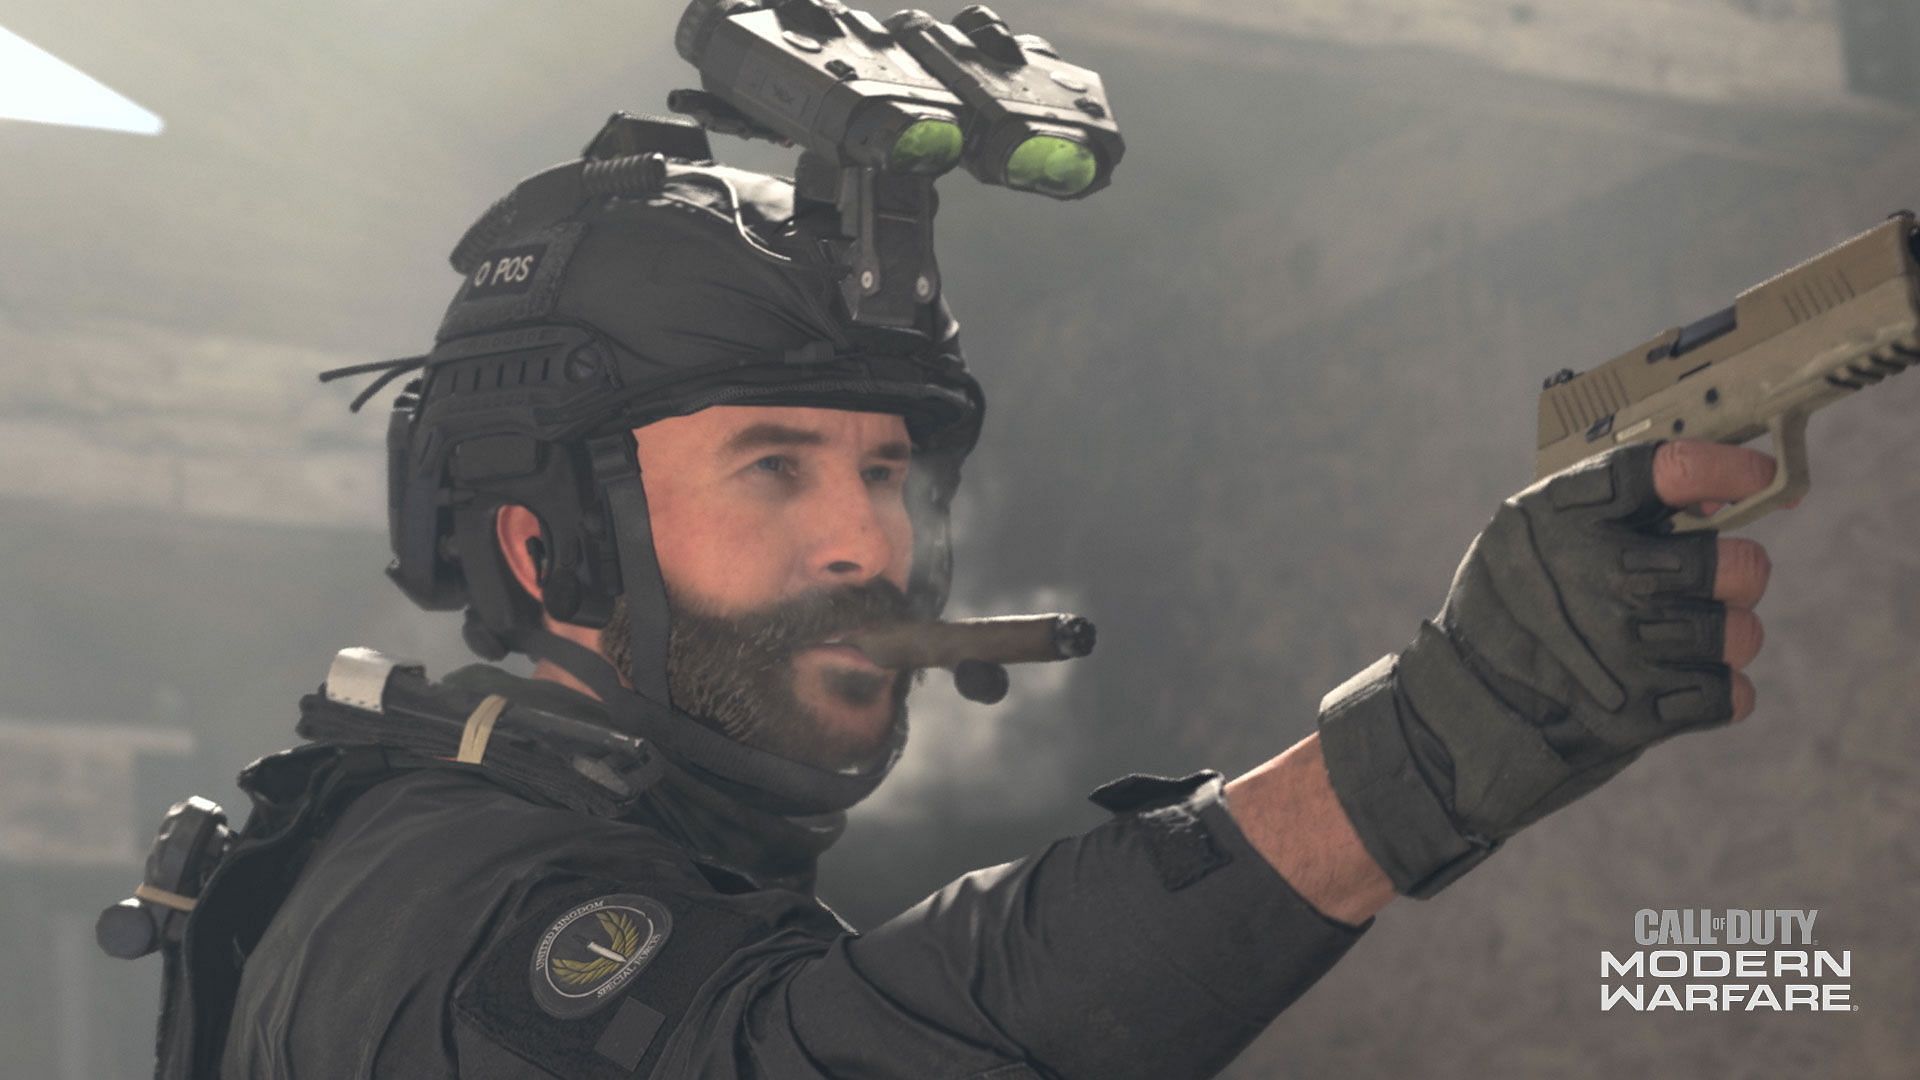 Captain Price from Modern Warfare series is getting a legendary character in COD Mobile (Image via Activision)